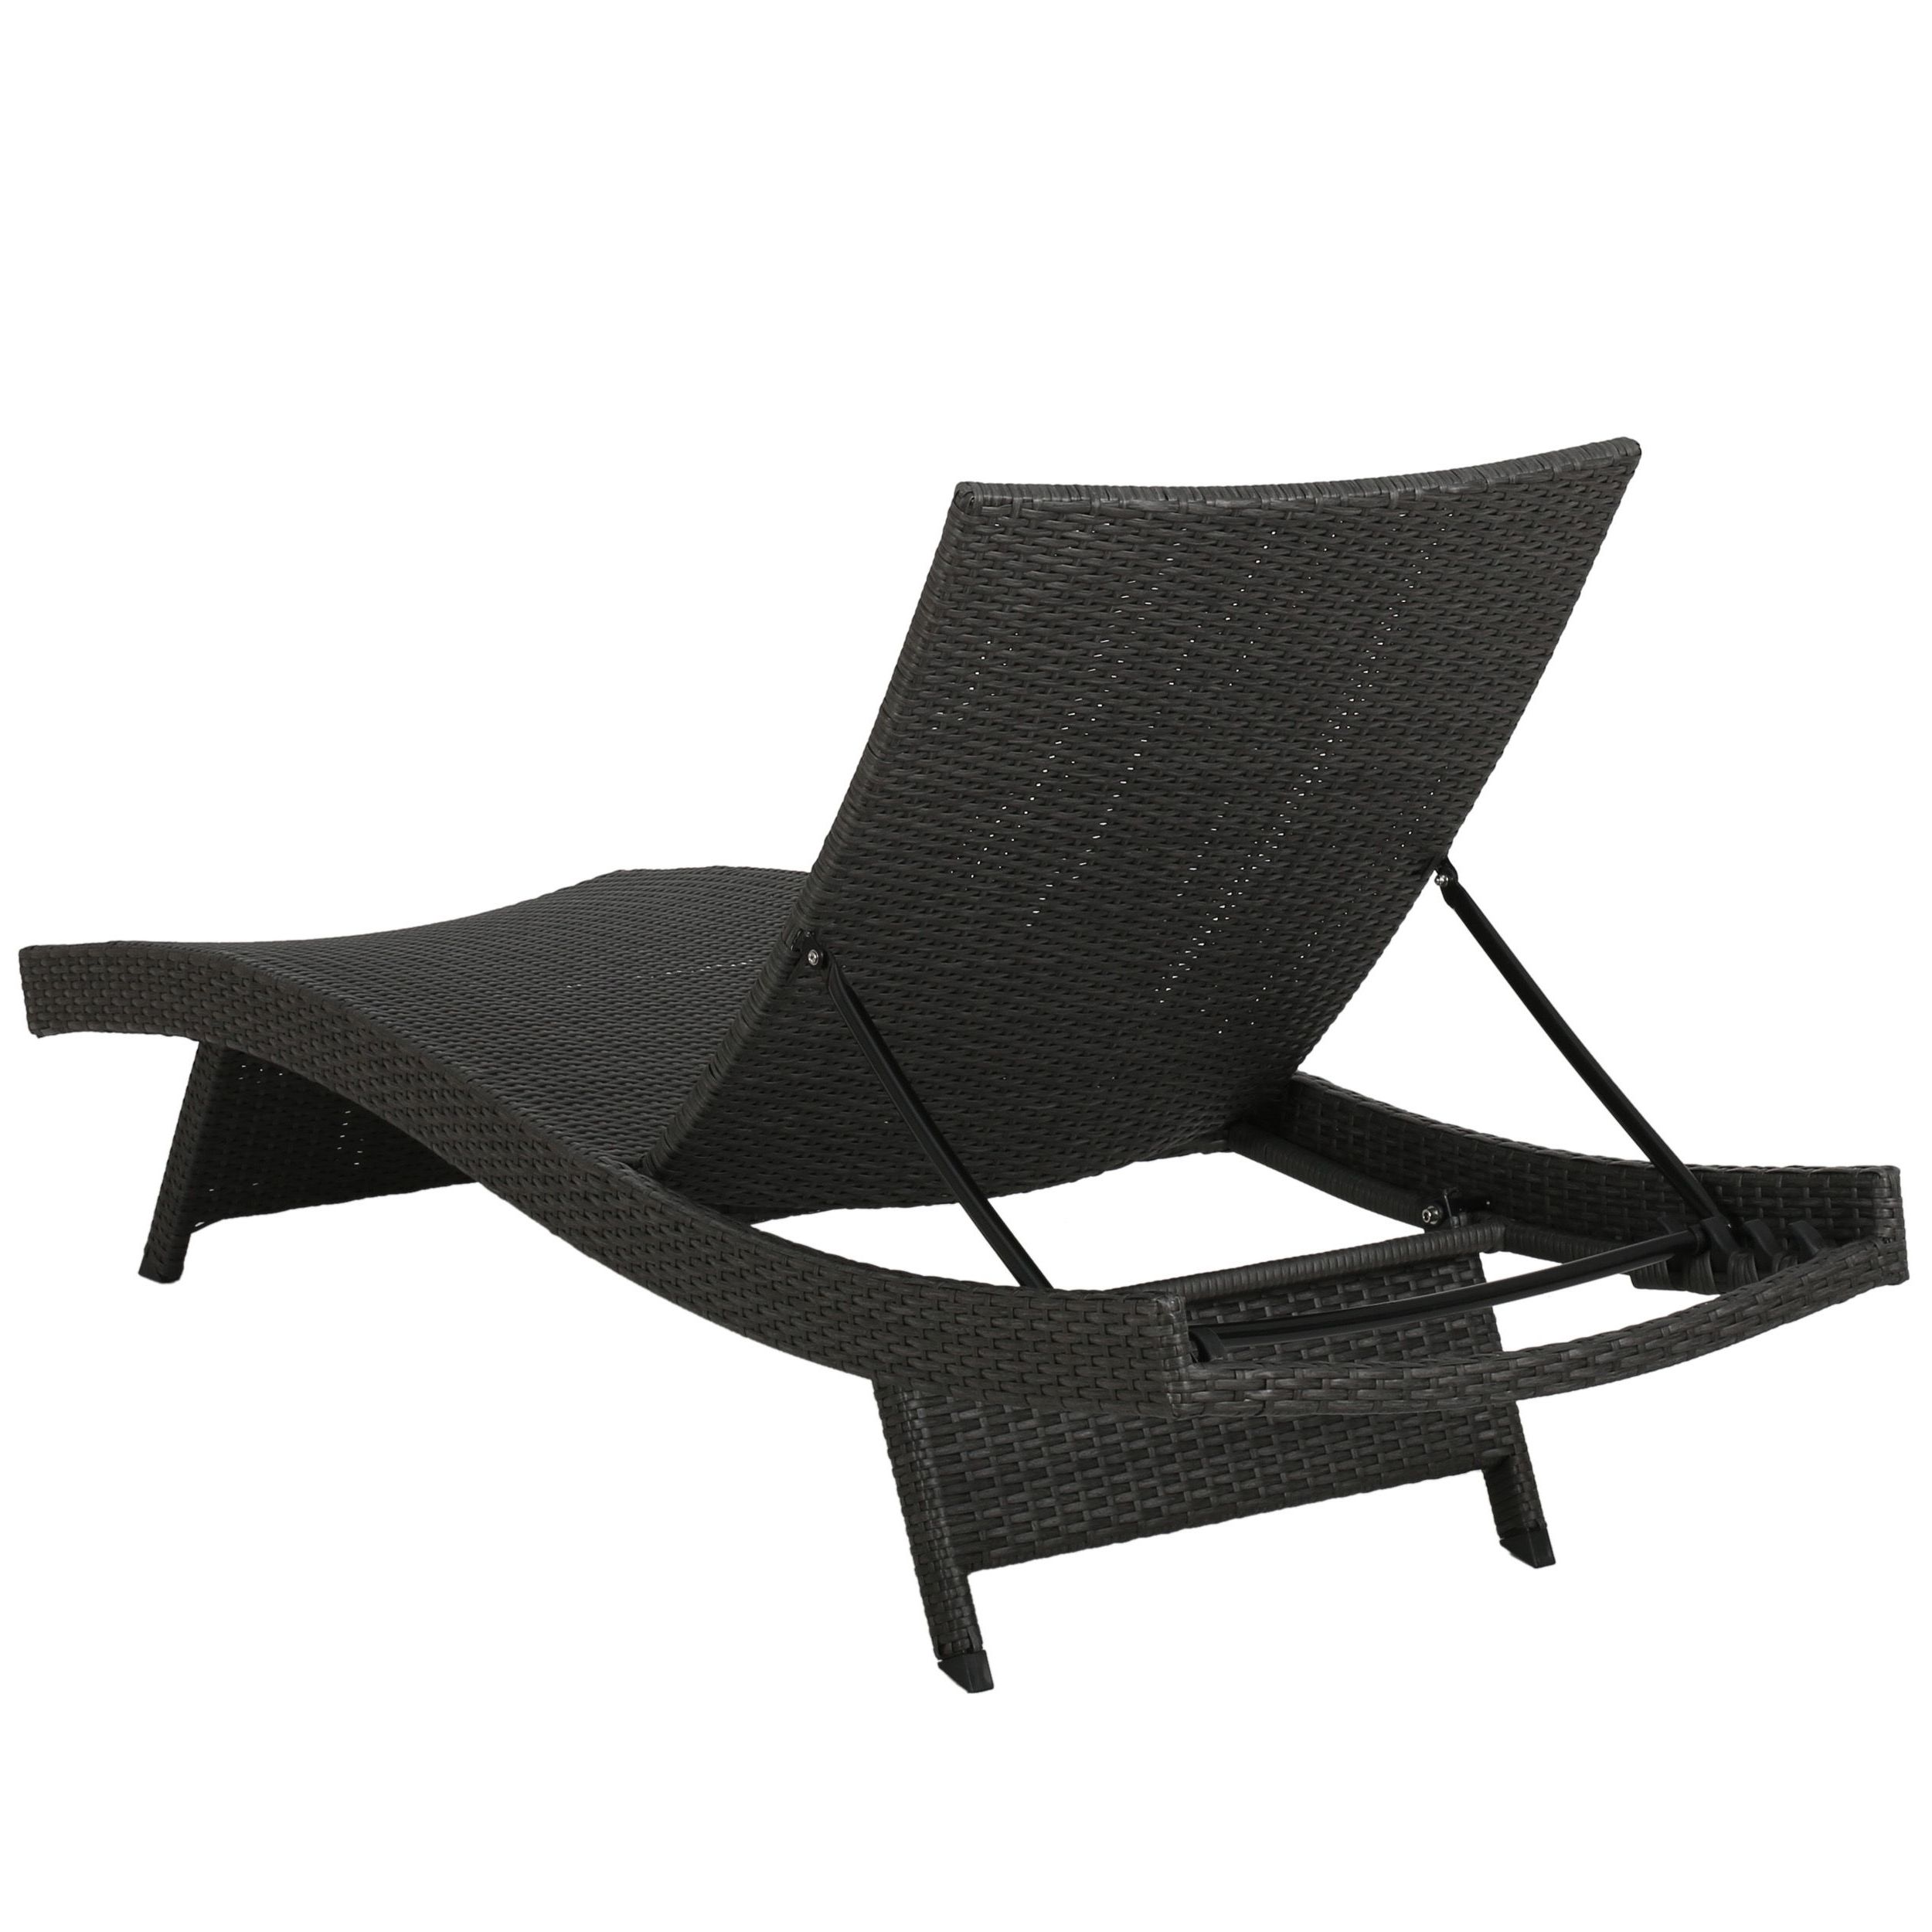 Outdoor Grey Wicker Chaise Lounge (set Of 4) – Walmart In Most Current Hampton Outdoor Chaise Lounges Acacia Wood And Wicker (View 21 of 25)